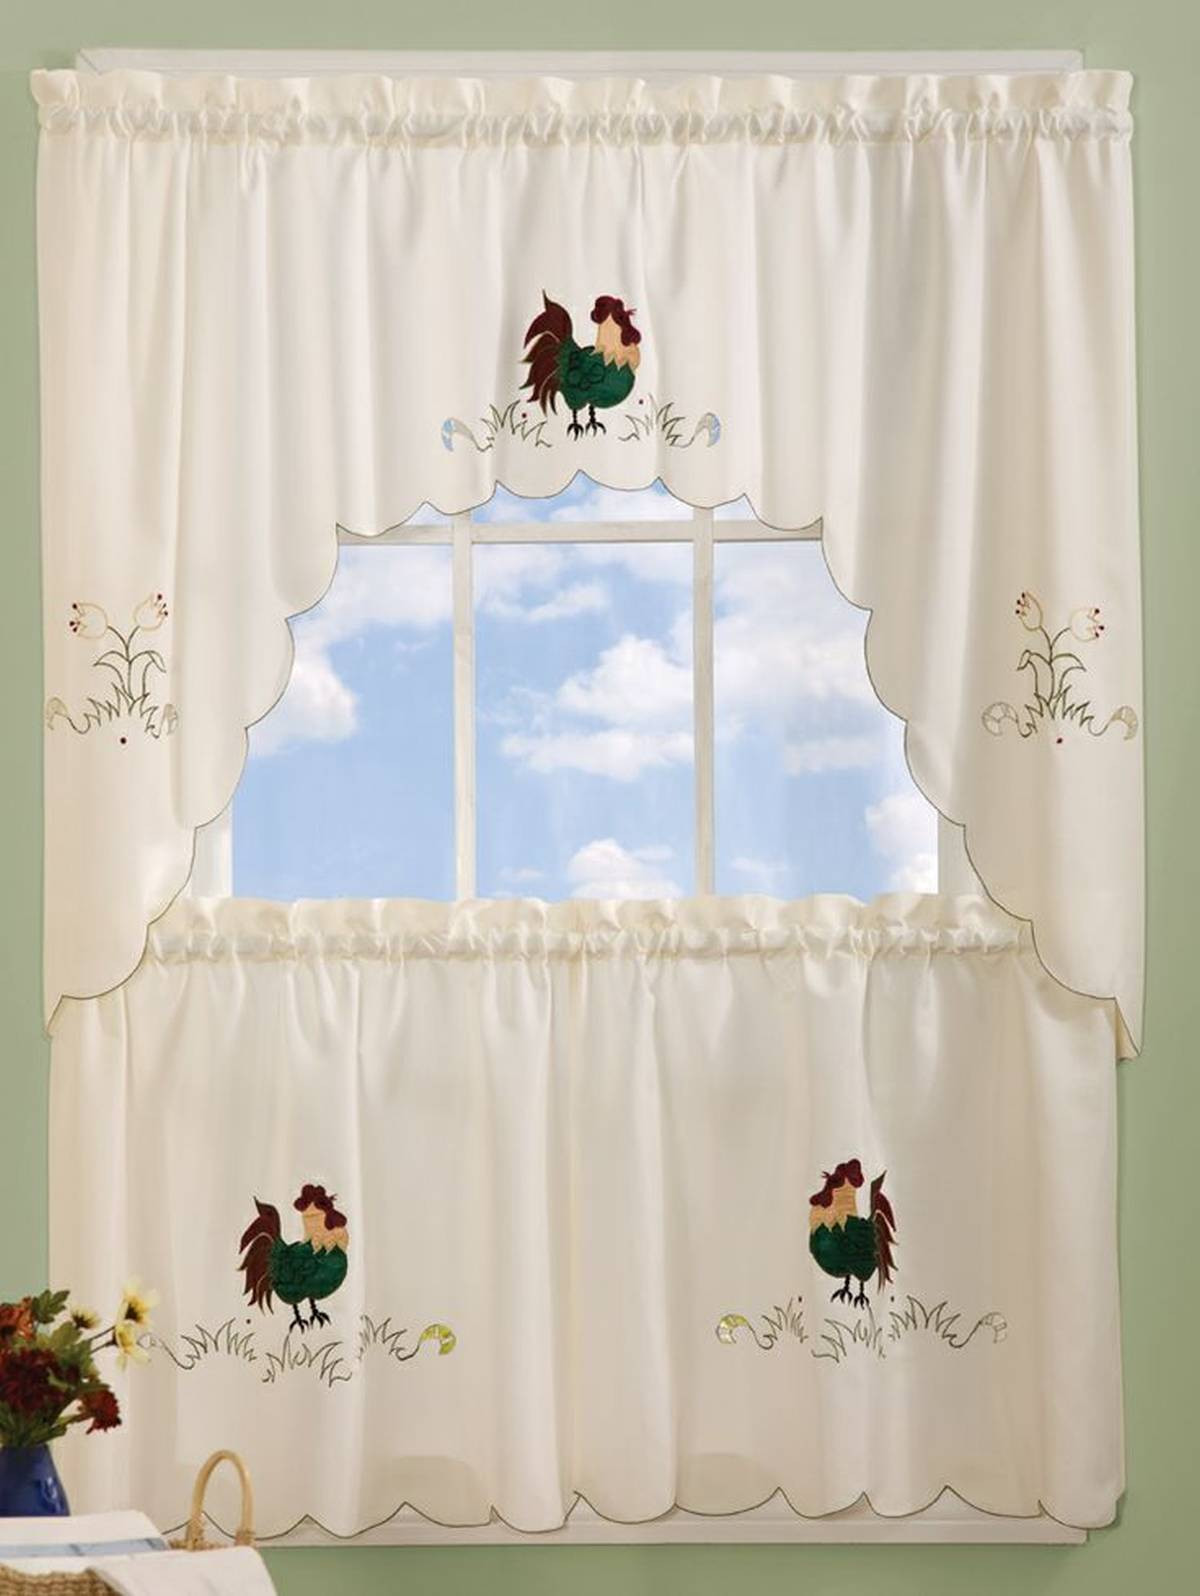 Chicken Kitchen Curtains Awesome 20 Useful Ideas Rooster Kitchen Curtains As Part Of Chicken Kitchen Curtains 